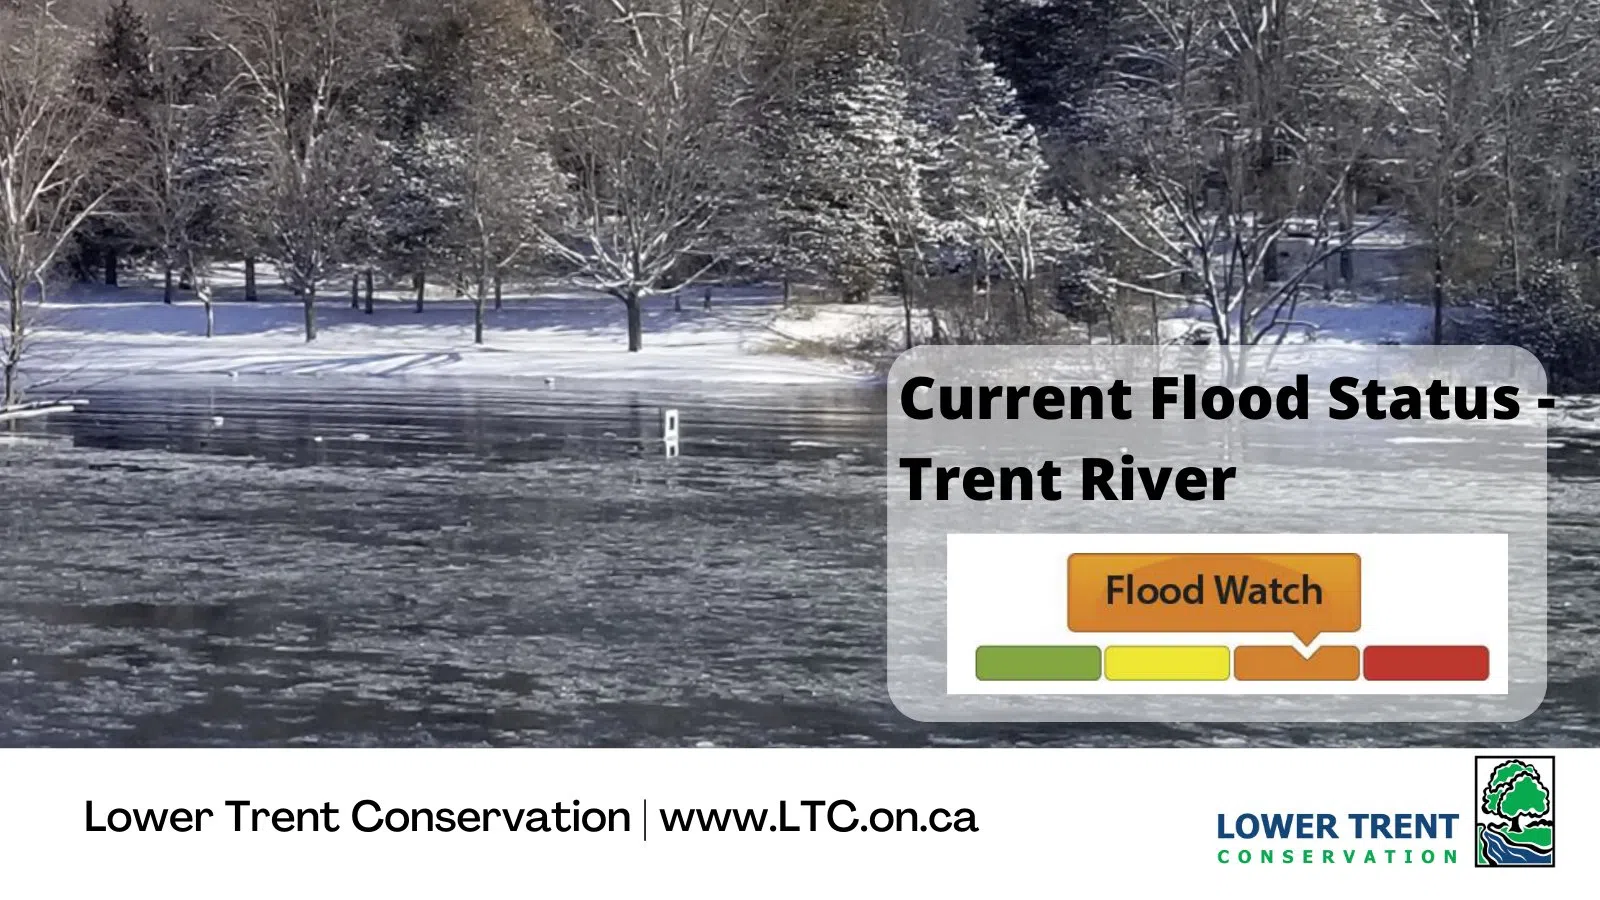 Lower Trent Conservation issues Flood Watch Statement for Trent River